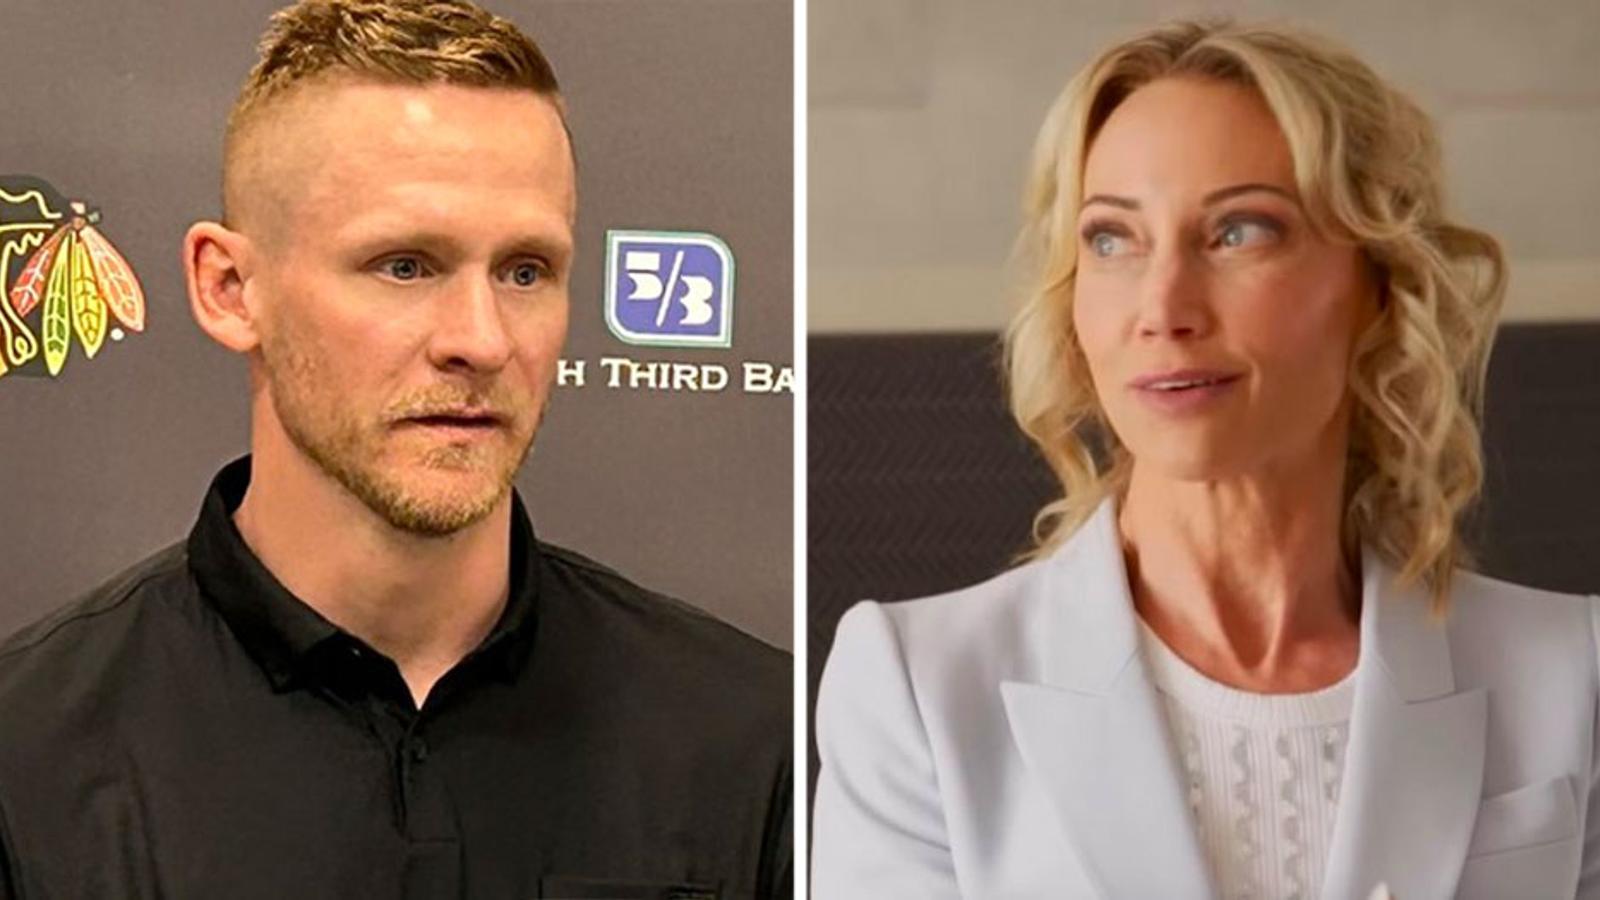 Corey Perry denies relationship with Melanie Bedard, announces he will enter alcohol rehab